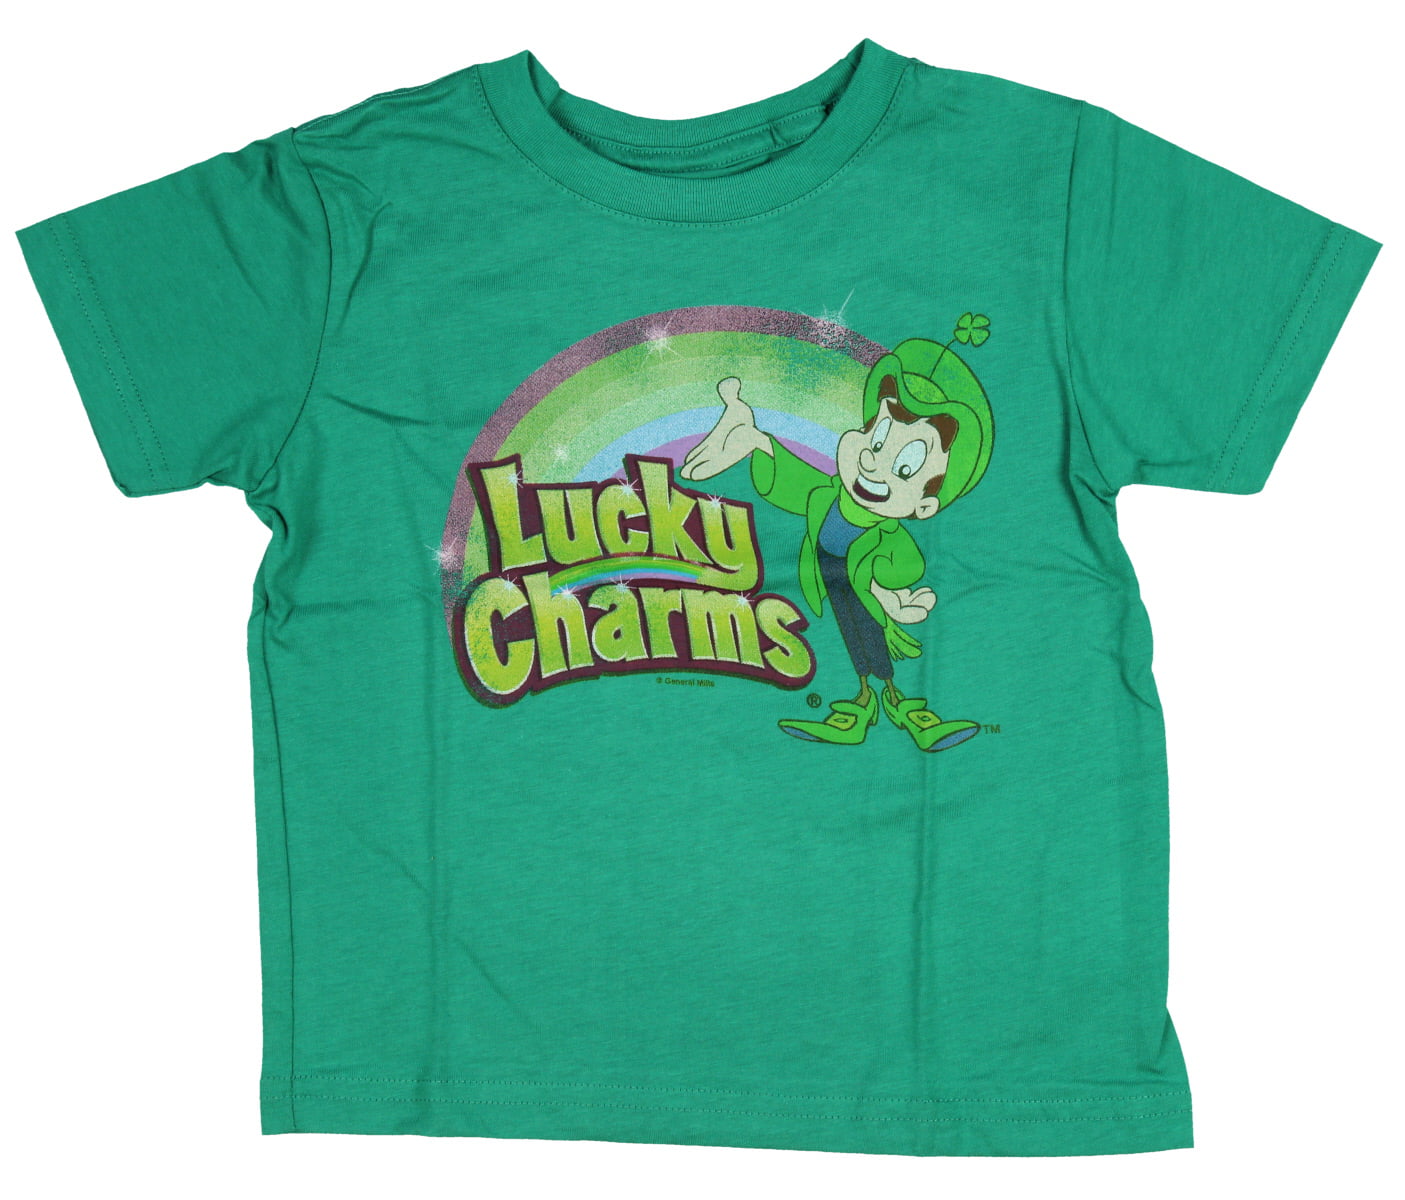 Unisex Good Luck Charm Shirt Youth/Toddler